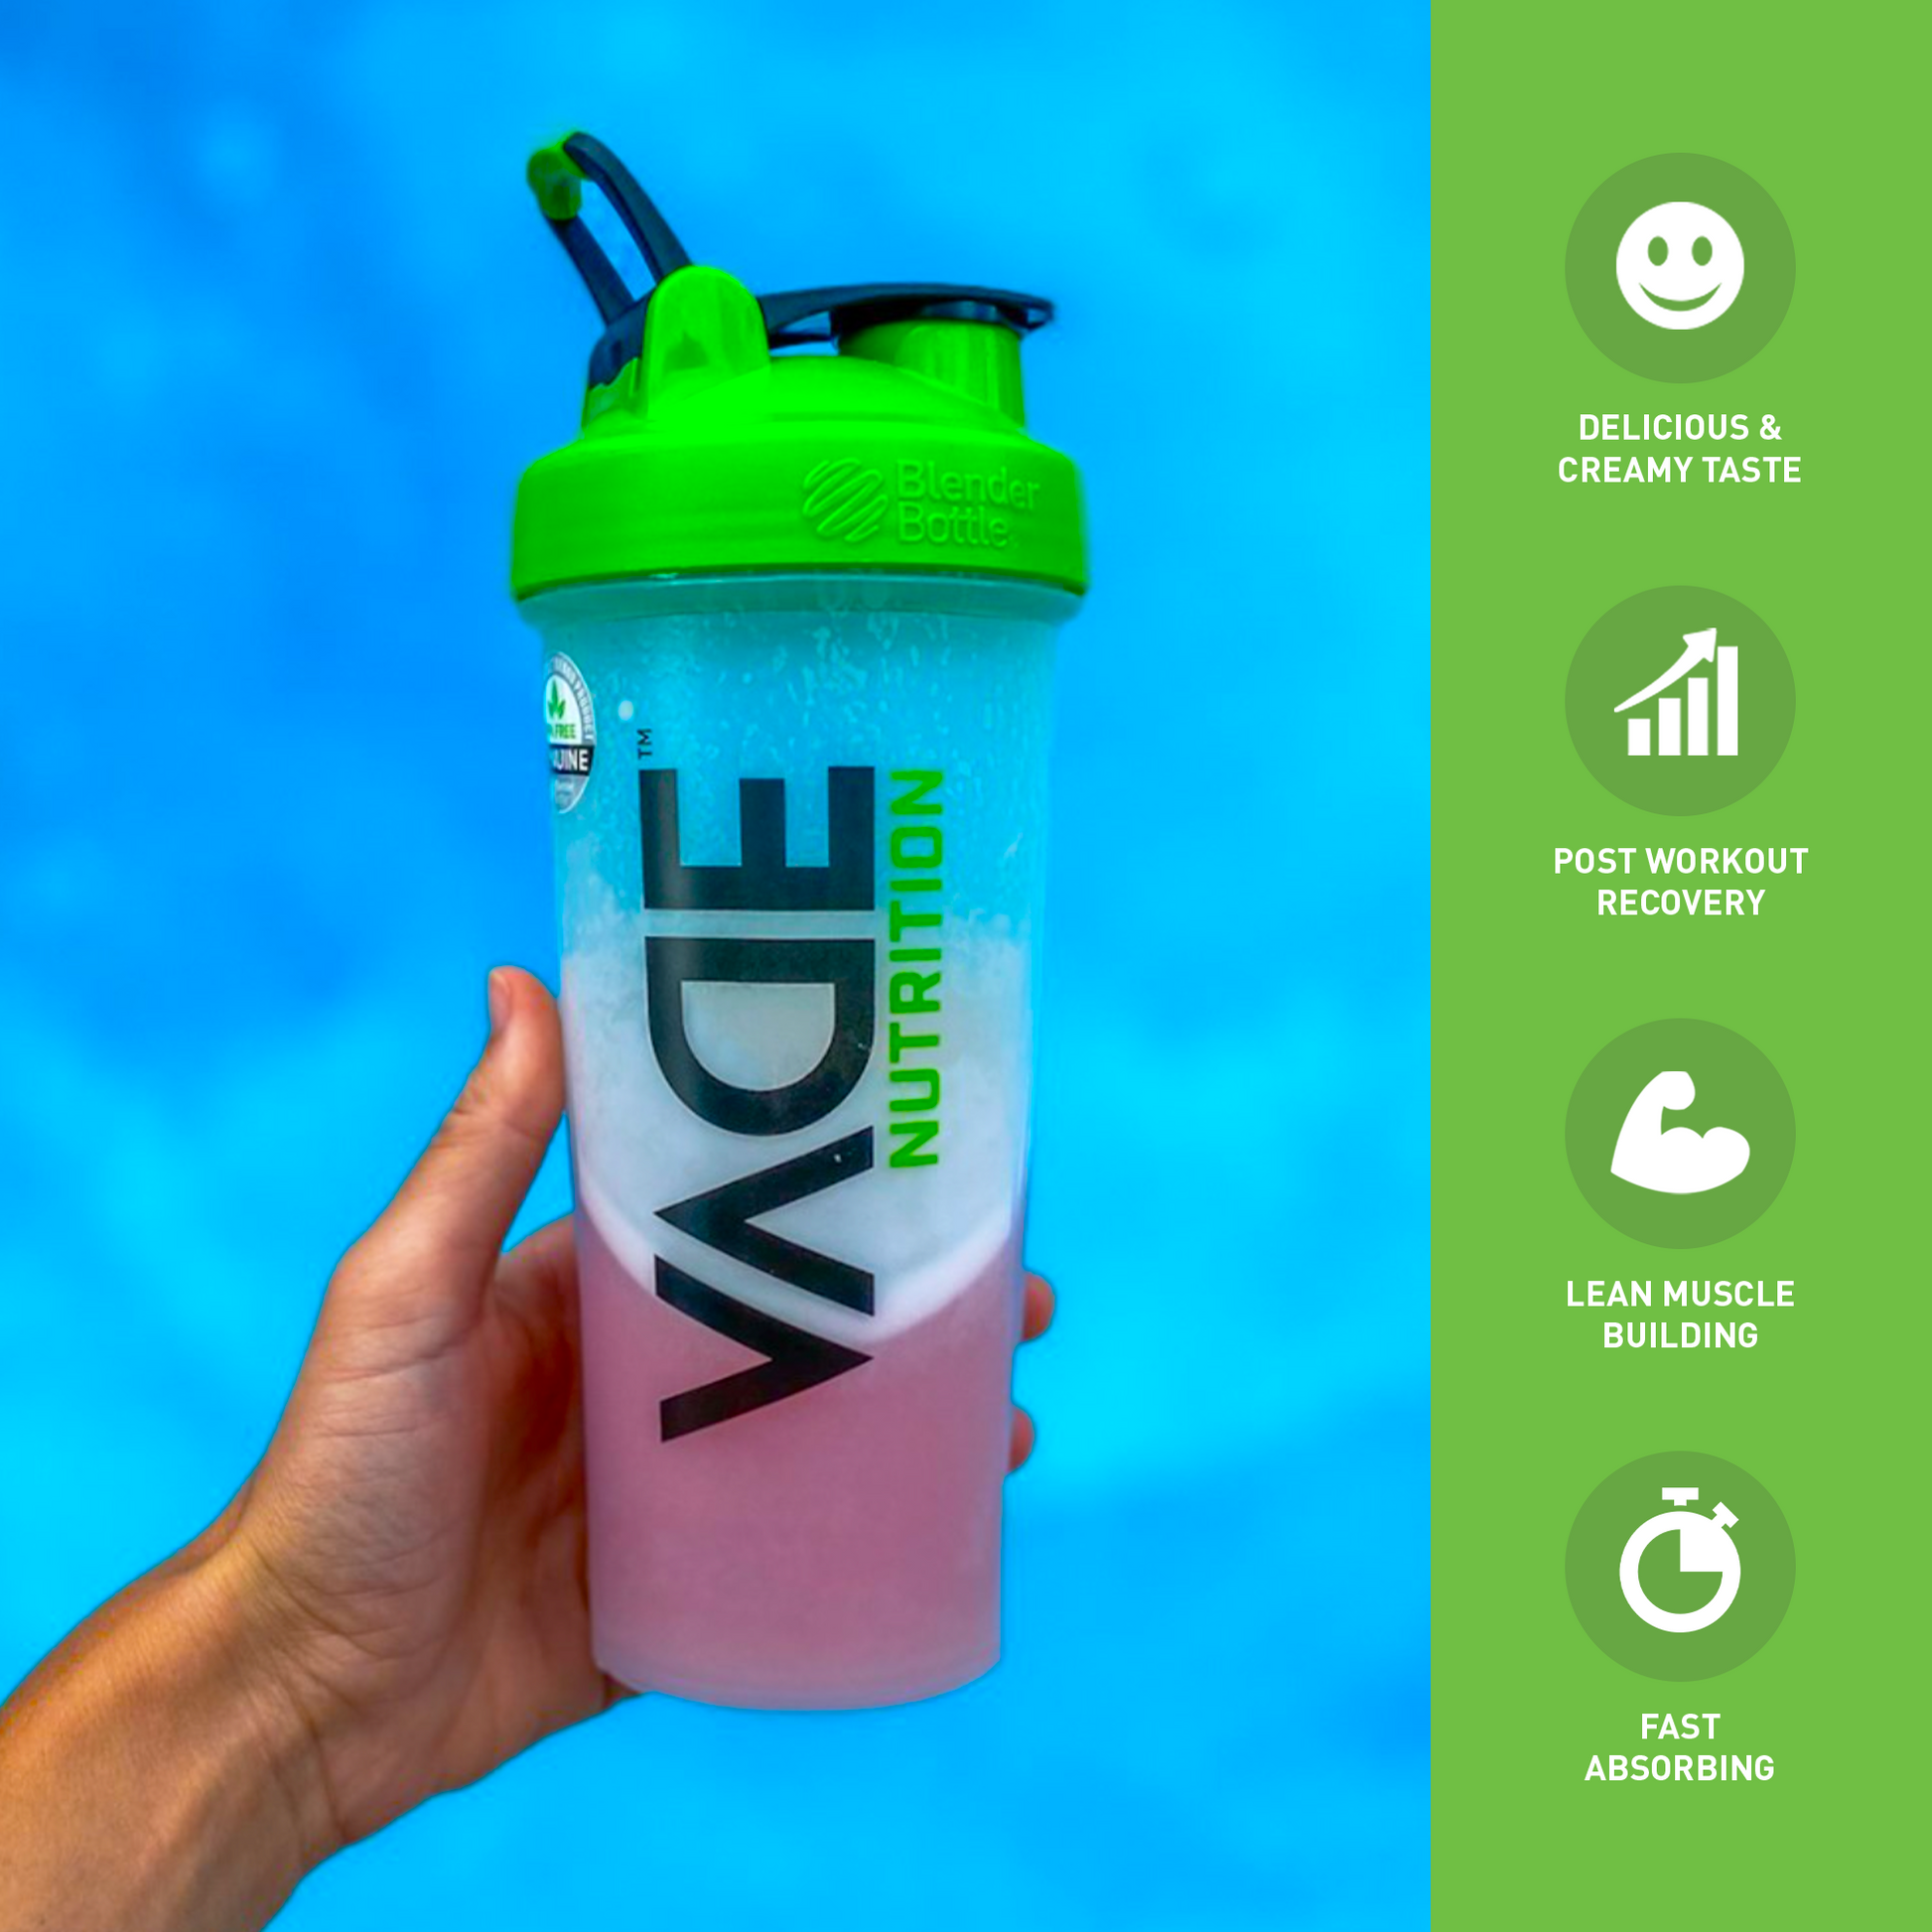 Vade Protein & Pre Workout Packs Whey Protein Cappuccino